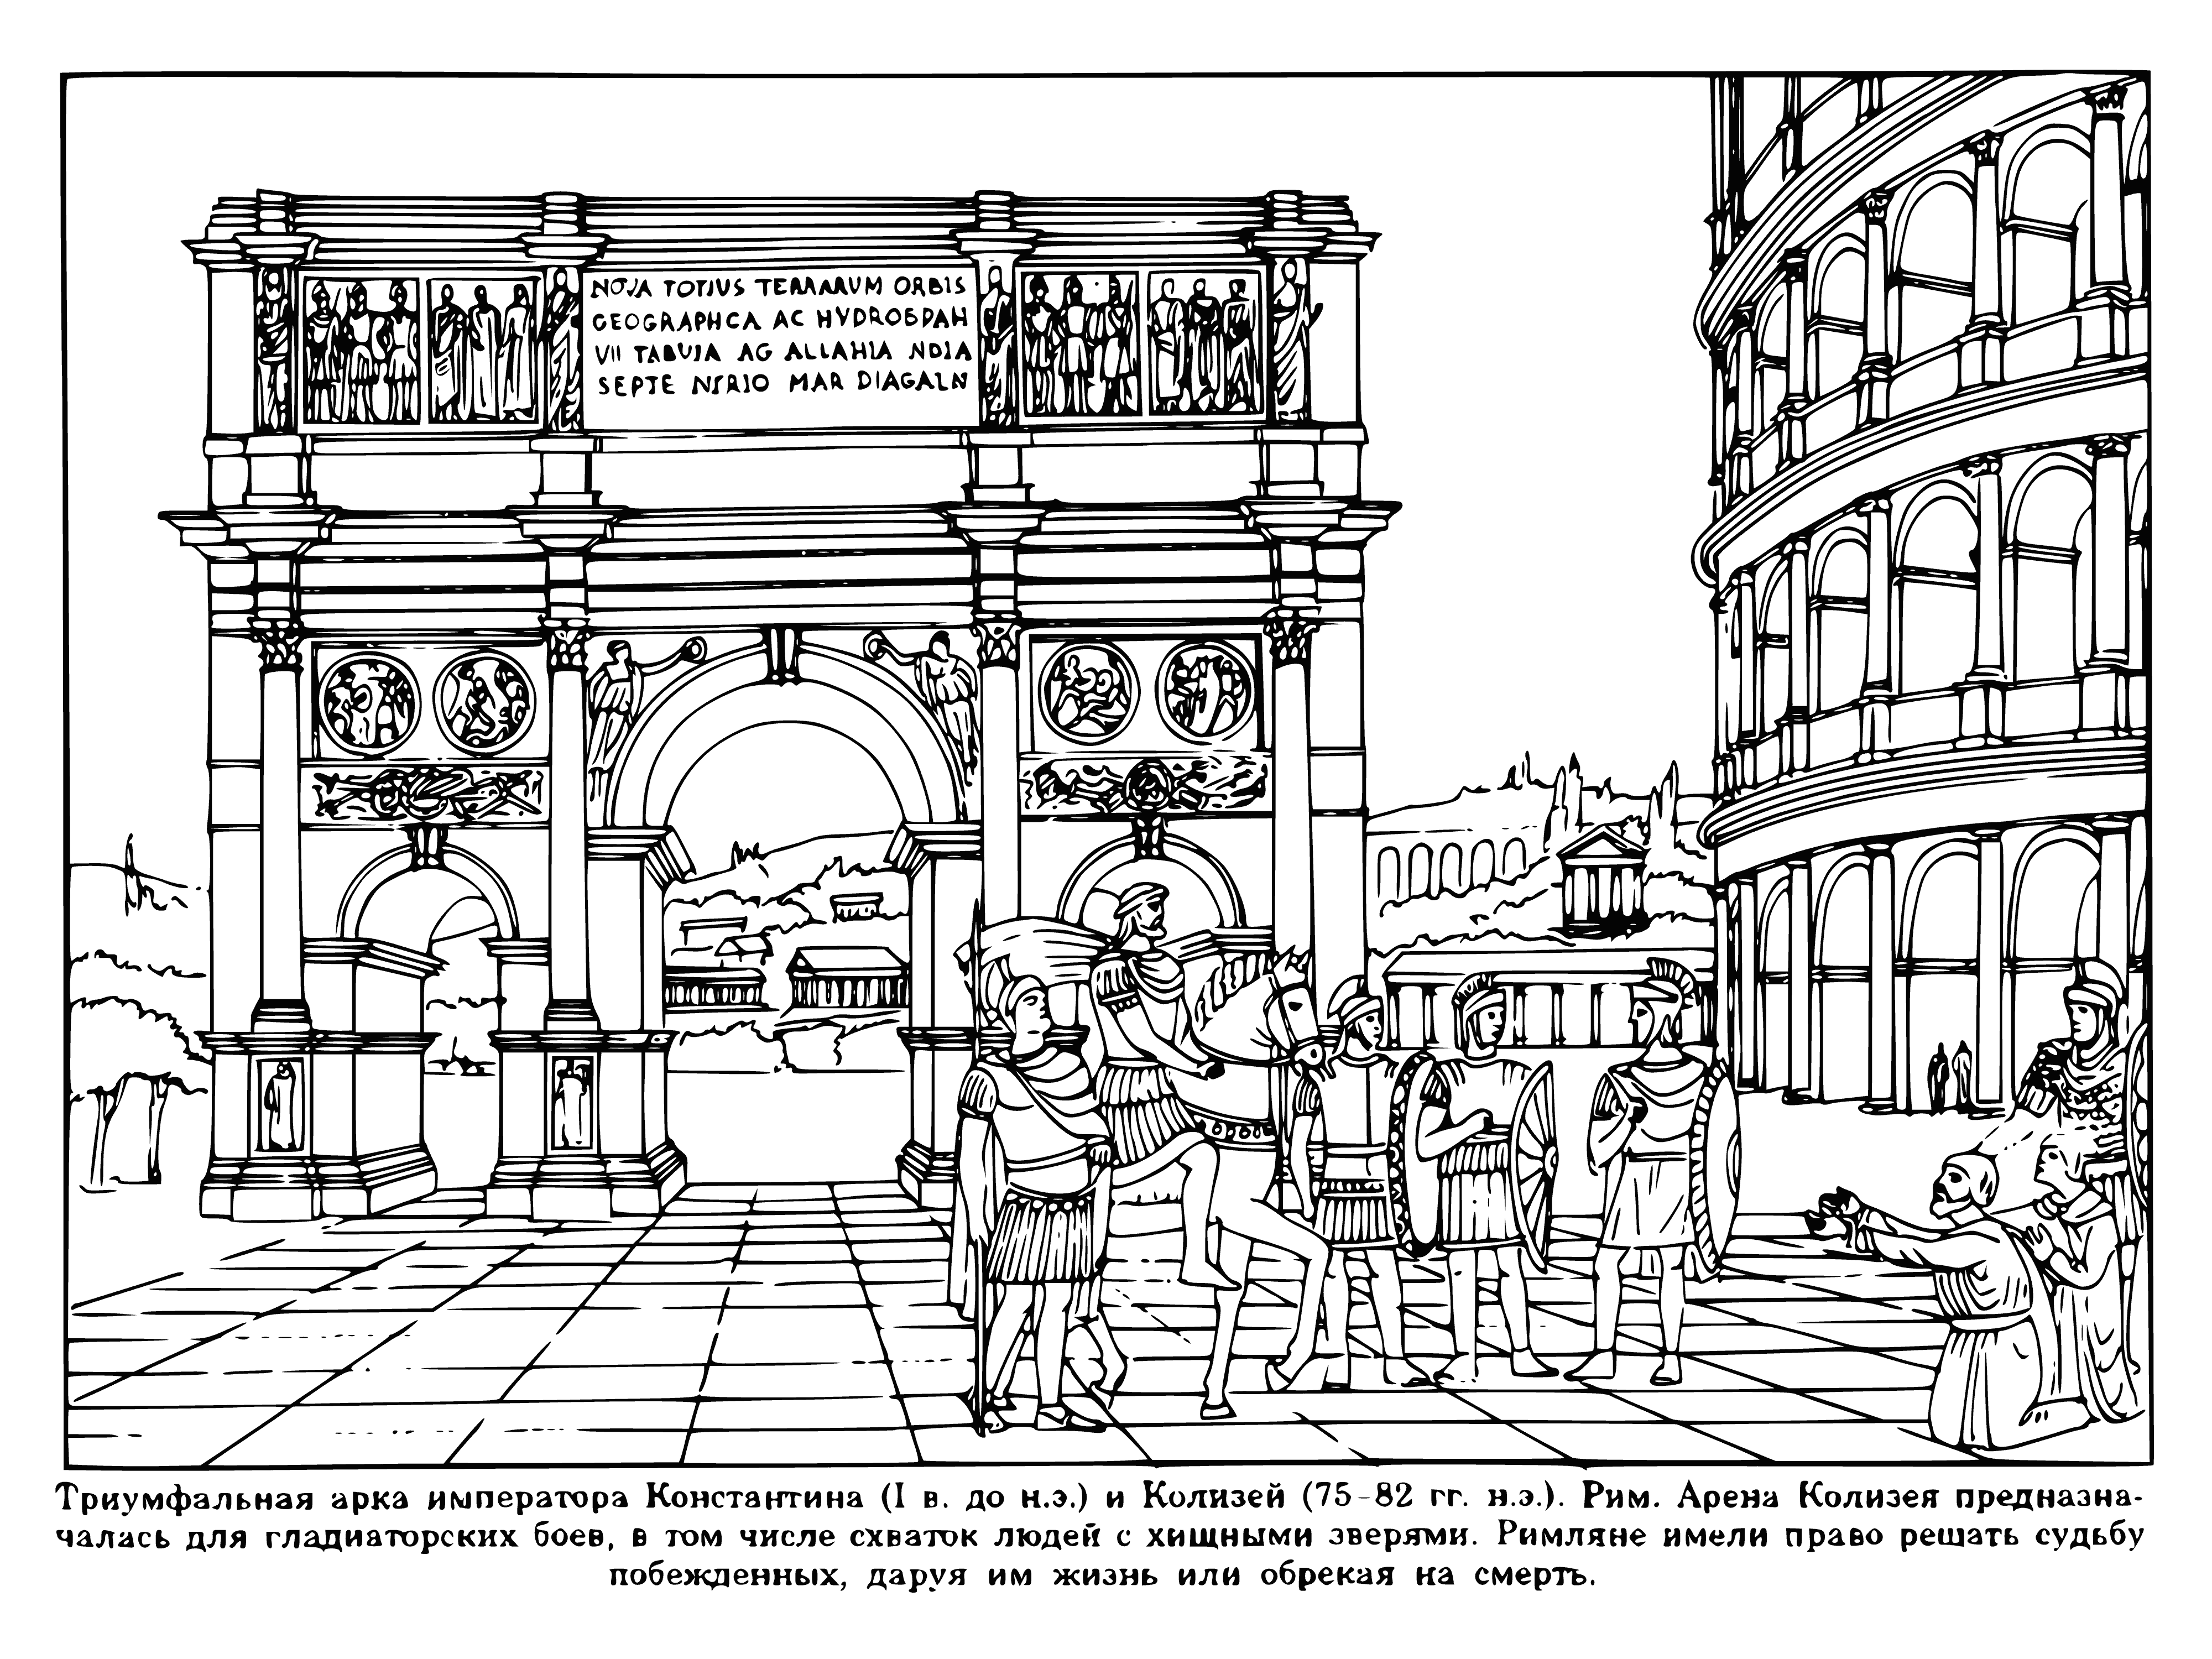 coloring page: Coloring page of Arc de Triomphe & Colosseum: relief & arches, events (cockfighting & gladiators) on sand-covered floor in oval arena. #coloringbook